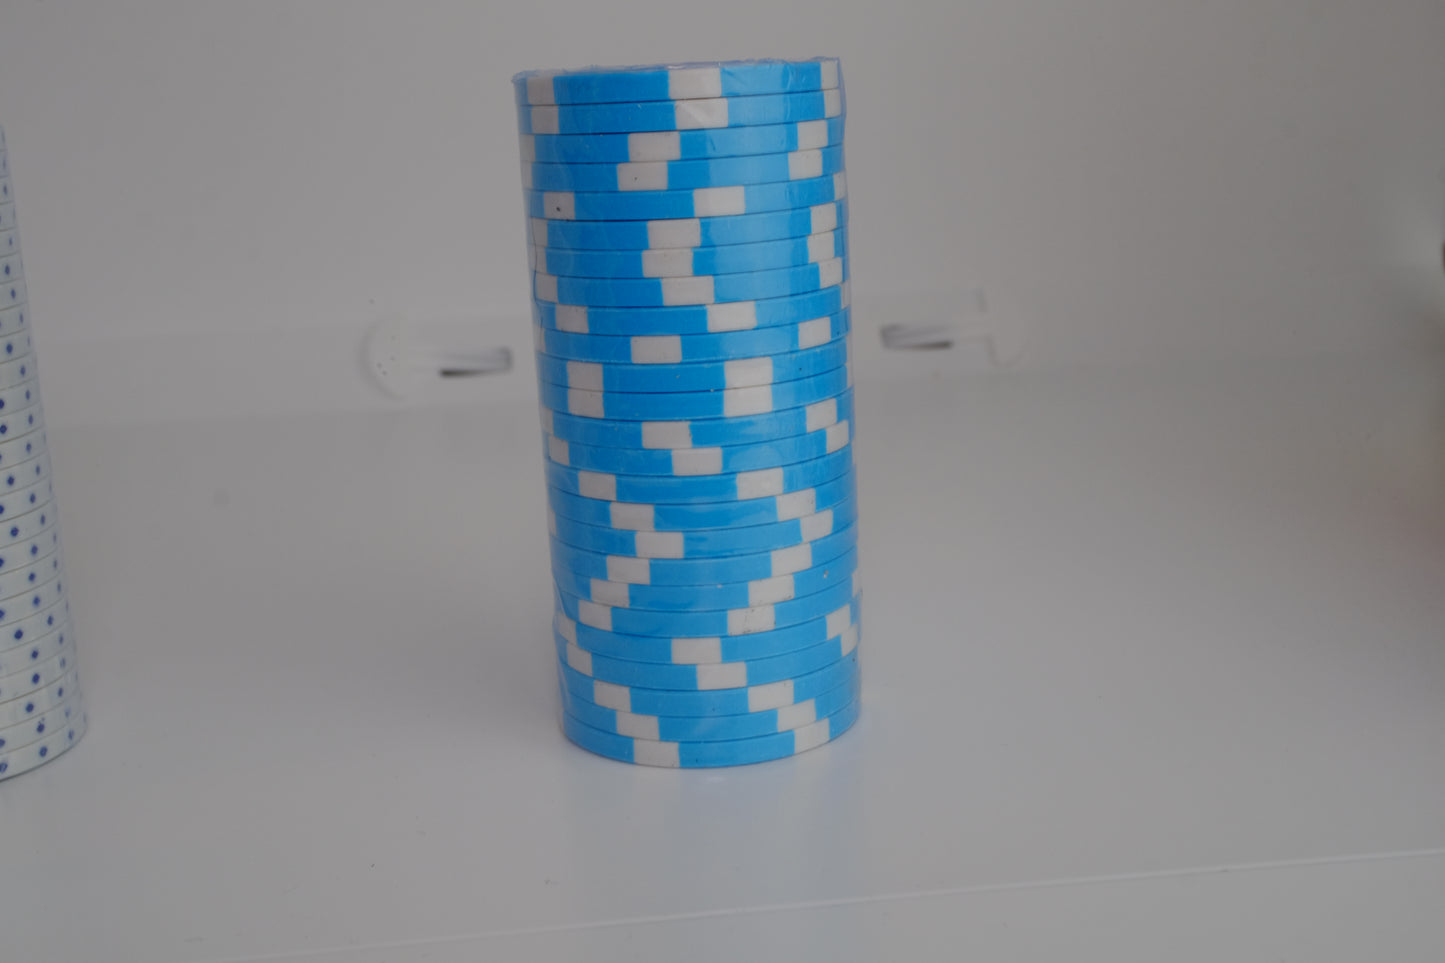 25 Count Dice Suit Chip Sleeve